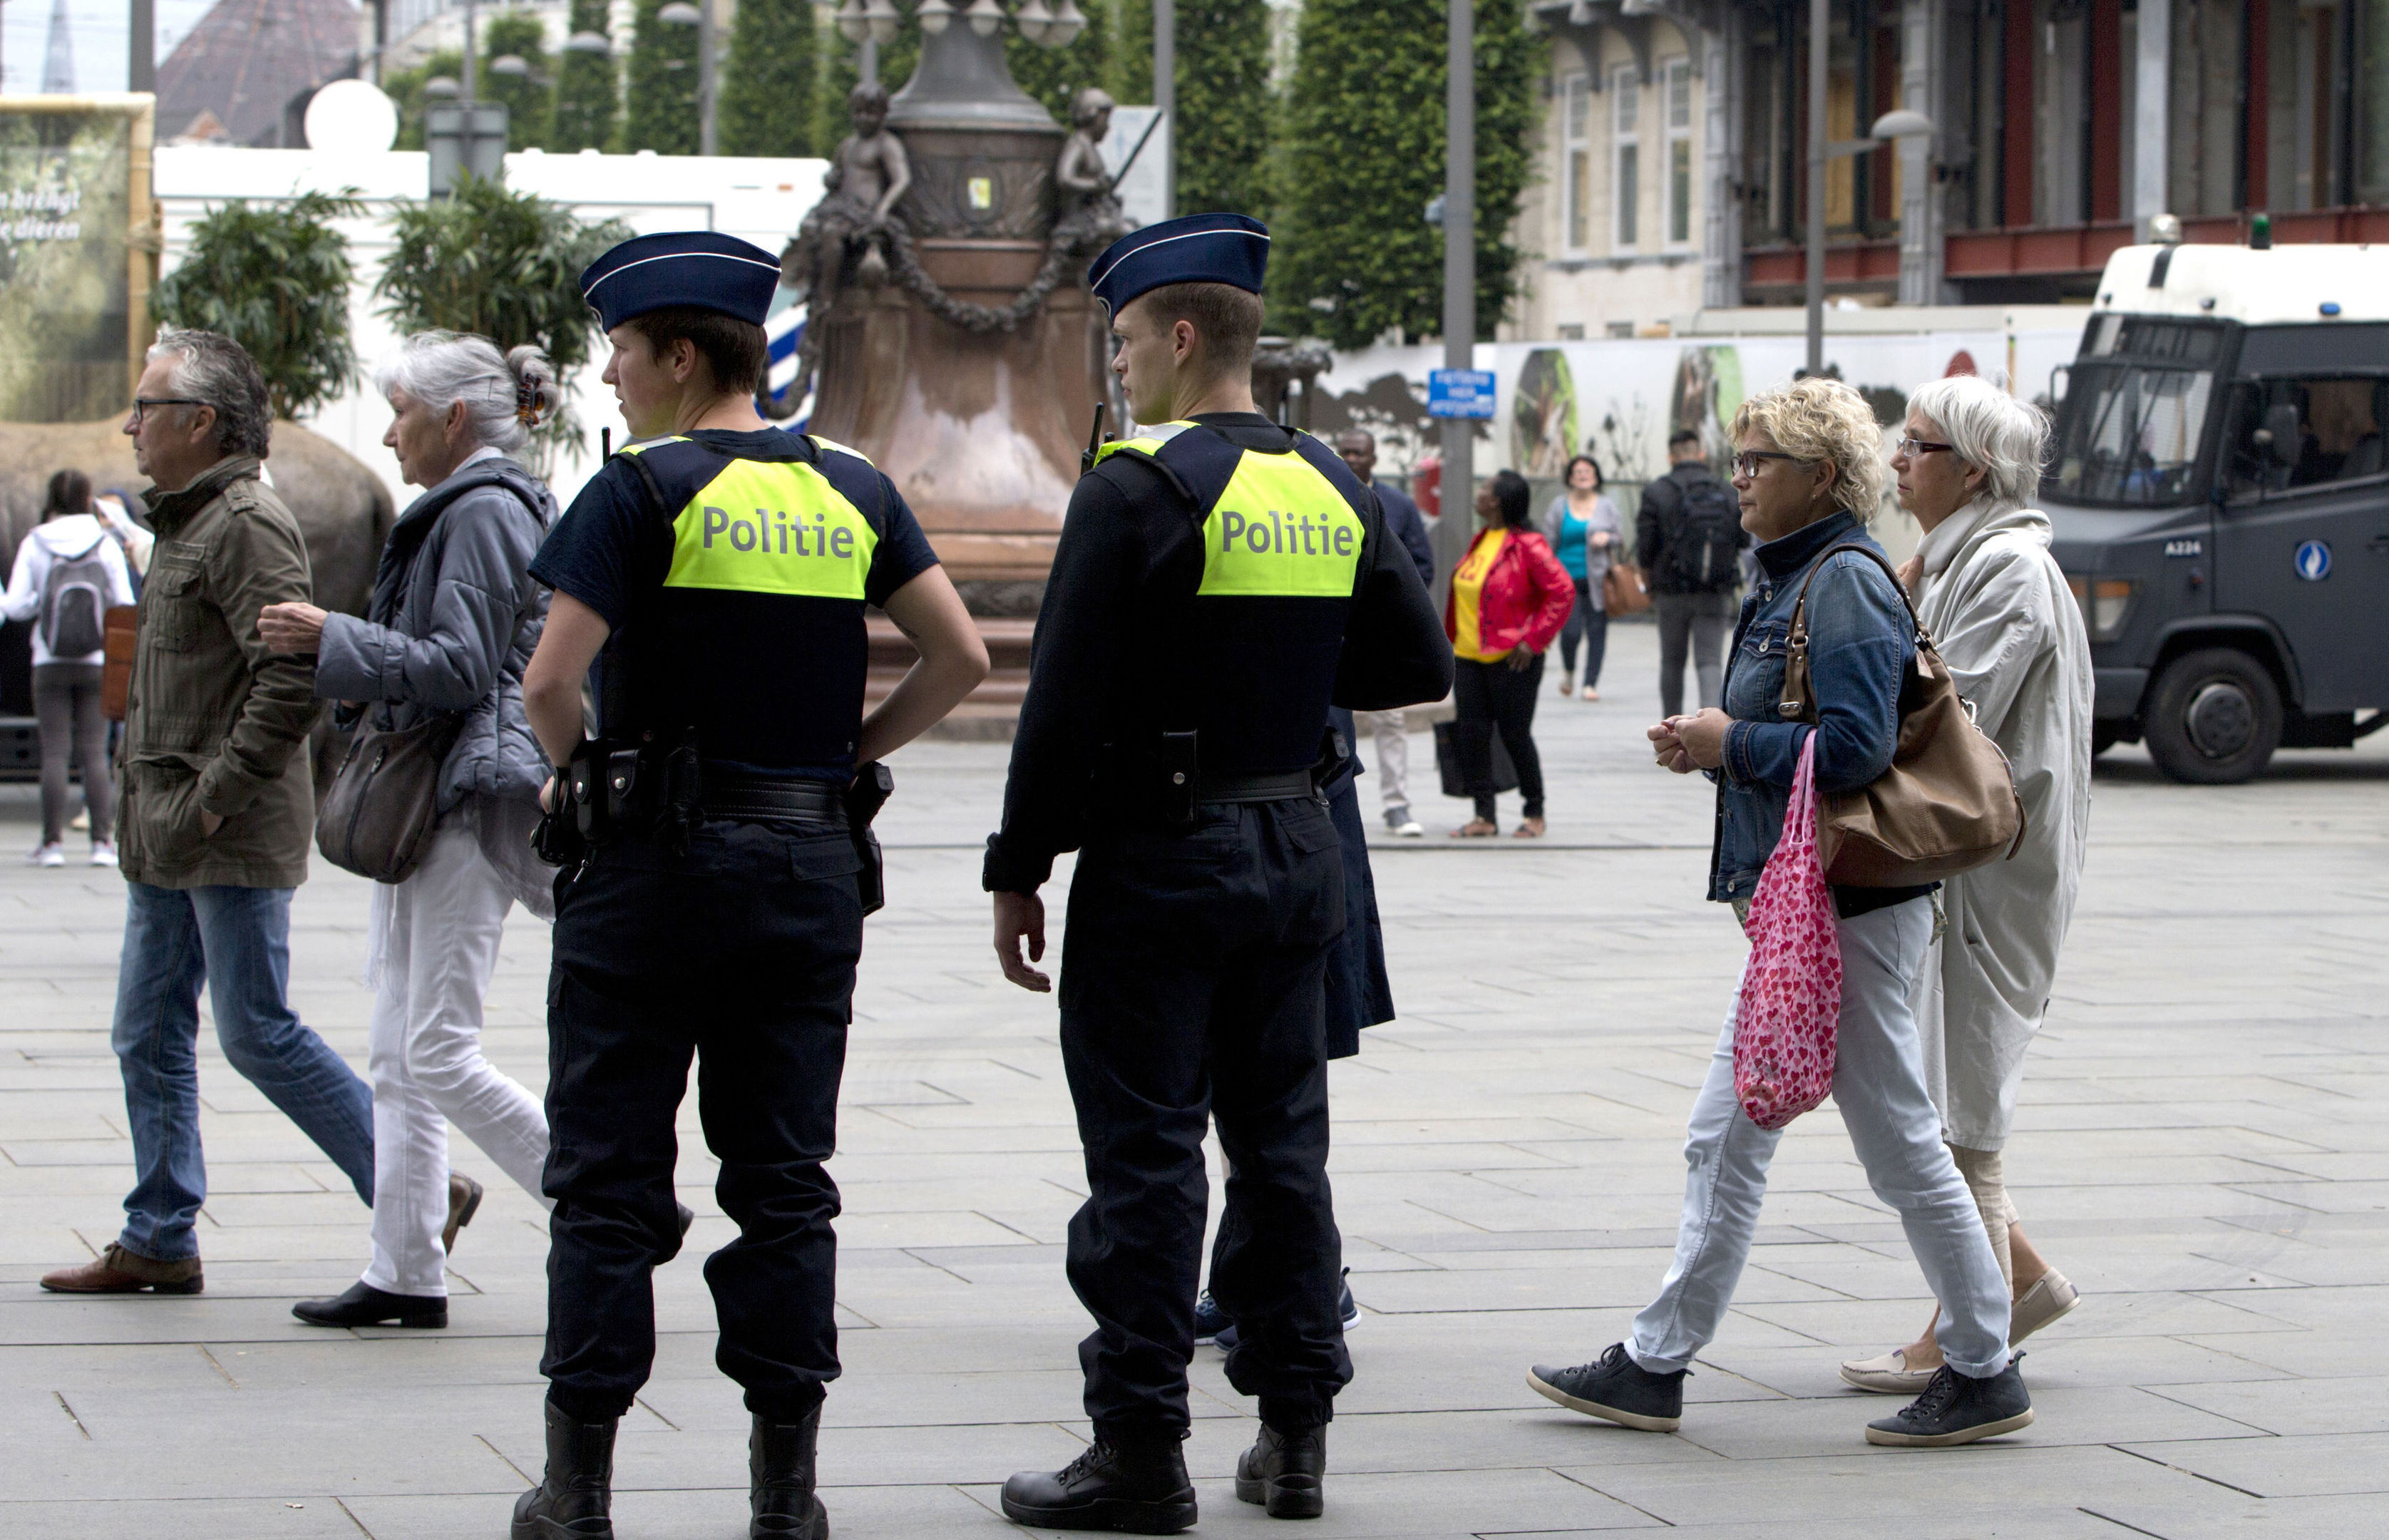 People walk by police standing guard outside the Antwerp Central train station in Antwerp, Belgium on Saturday, June 18, 2016. Police and the bomb squad unit responded to a suspect package in the Antwerp station while the Belgian federal prosecutor's office said early Saturday that homes and car ports were searched in 16 municipalities, mostly in and around Brussels in an anti-terror sweep. (AP Photo/Virginia Mayo)